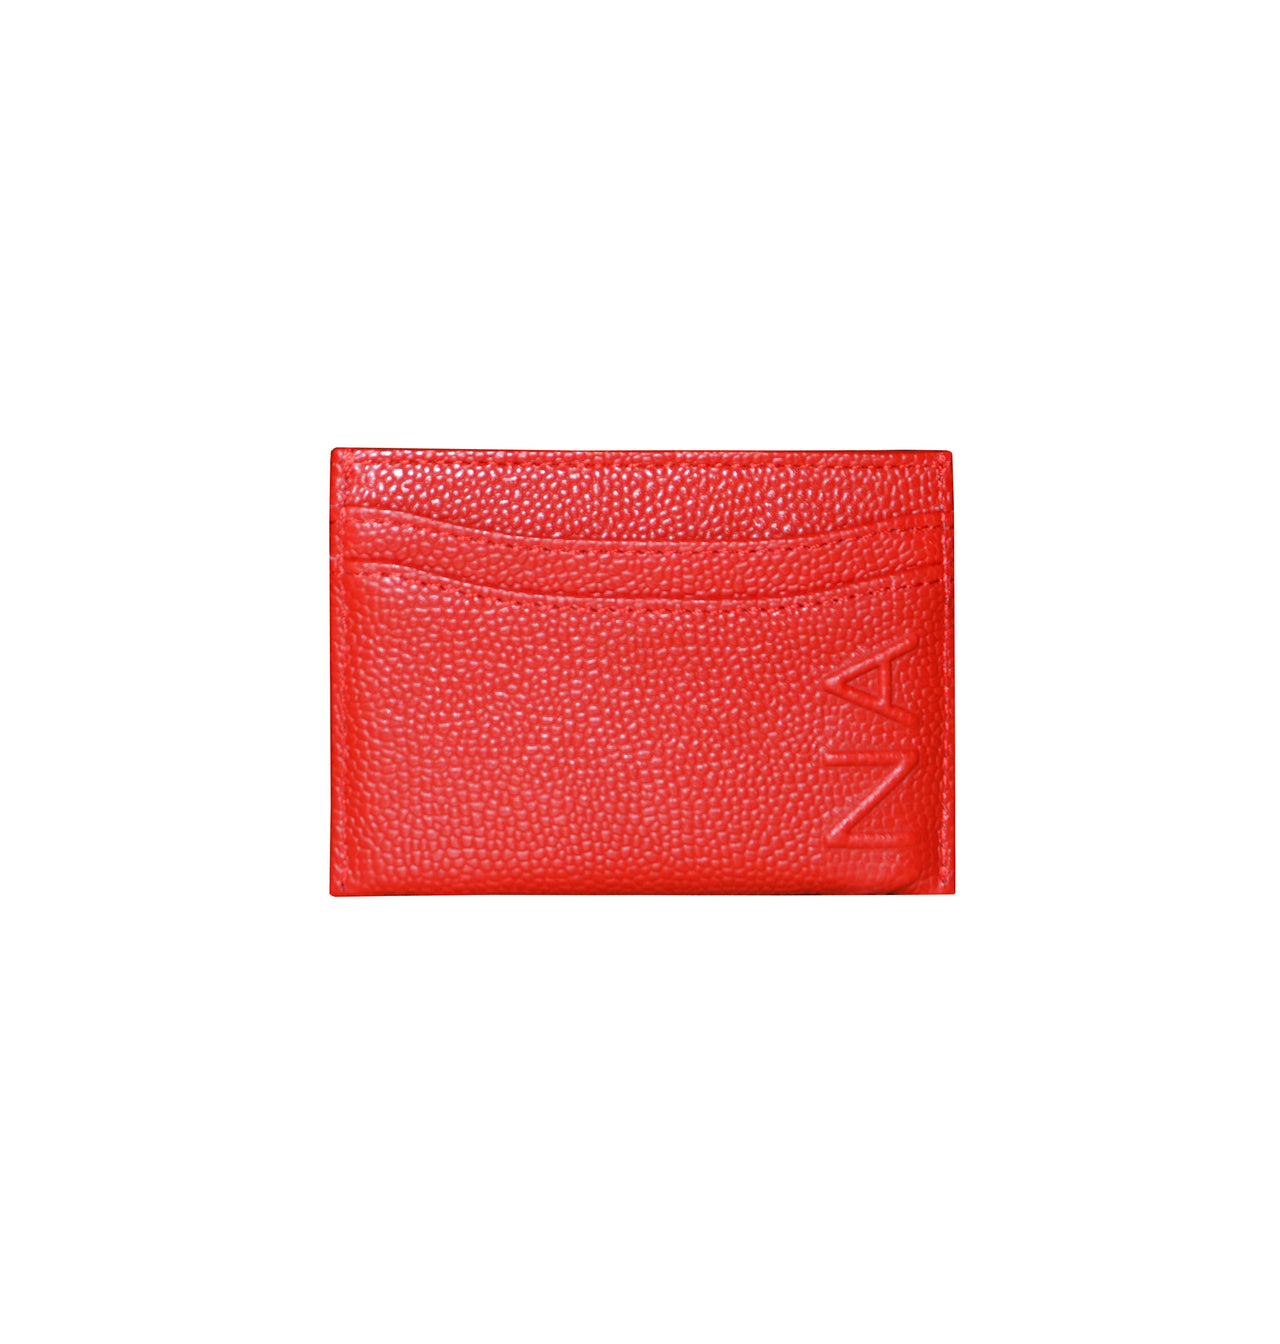 CARD HOLDER IN RED